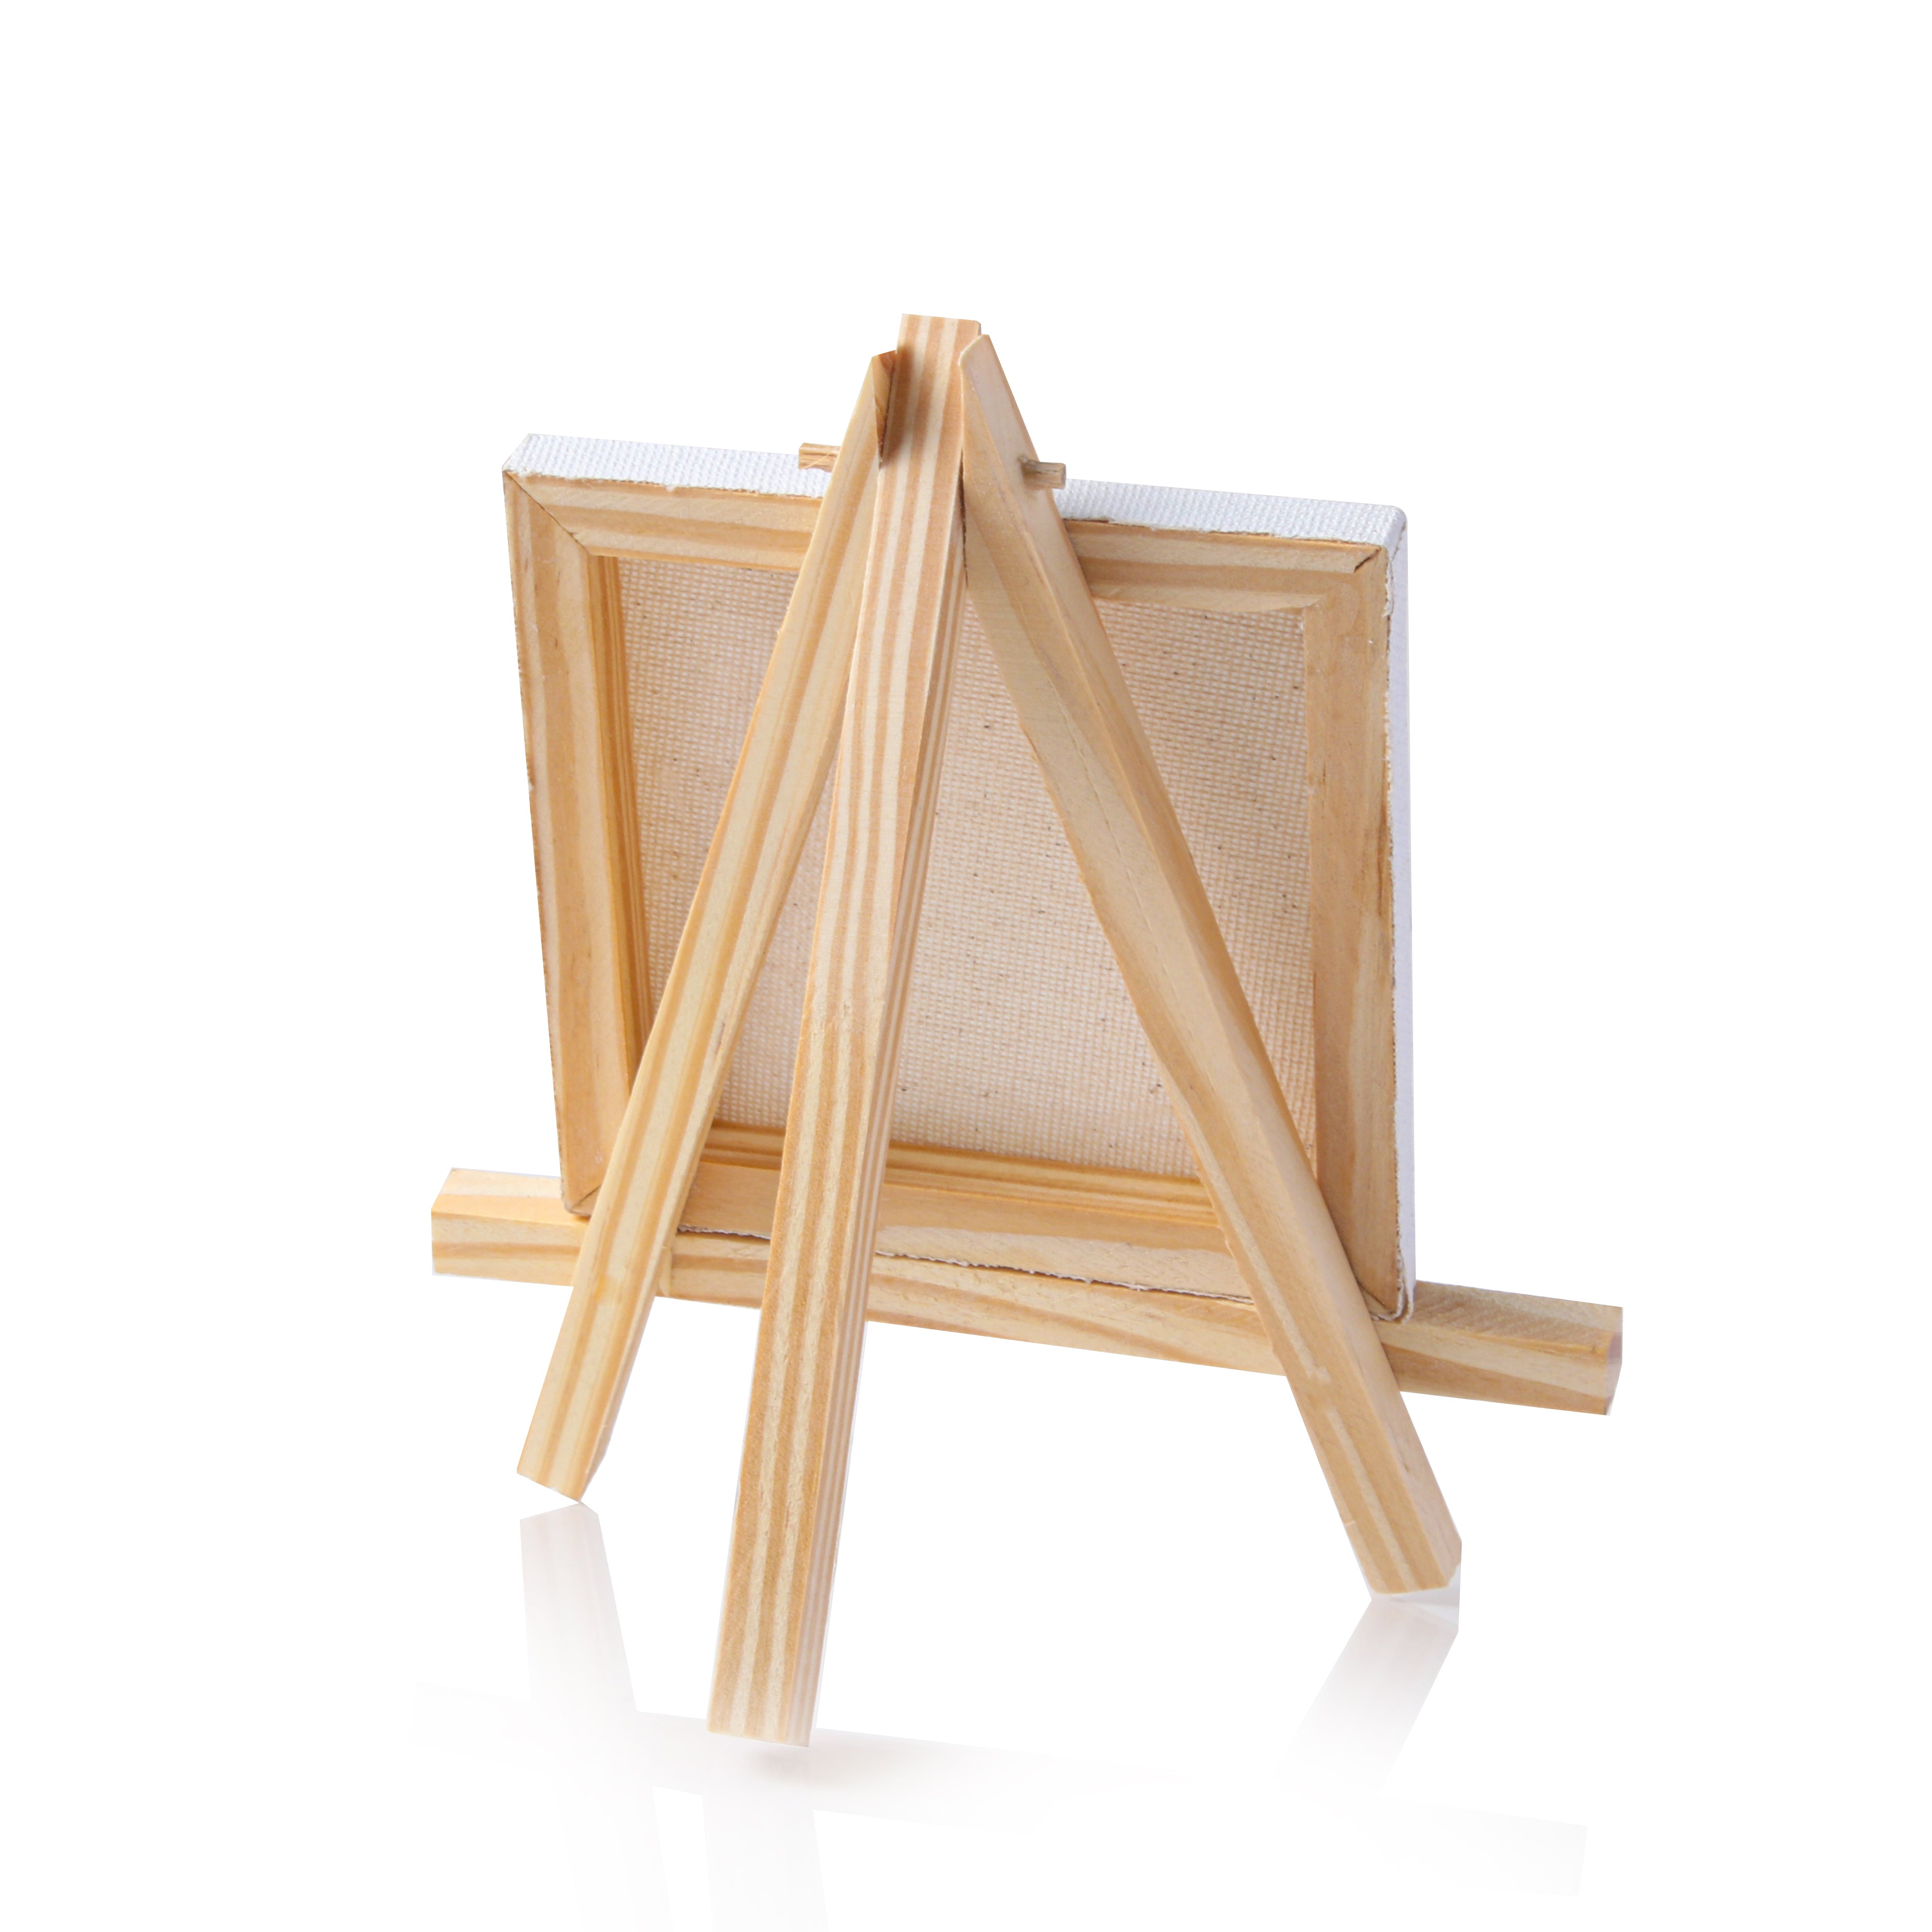 Wooden Mini Easel With Canvas Easel Size 20cm Canvas Size 15 X 15cm Set of 5pc